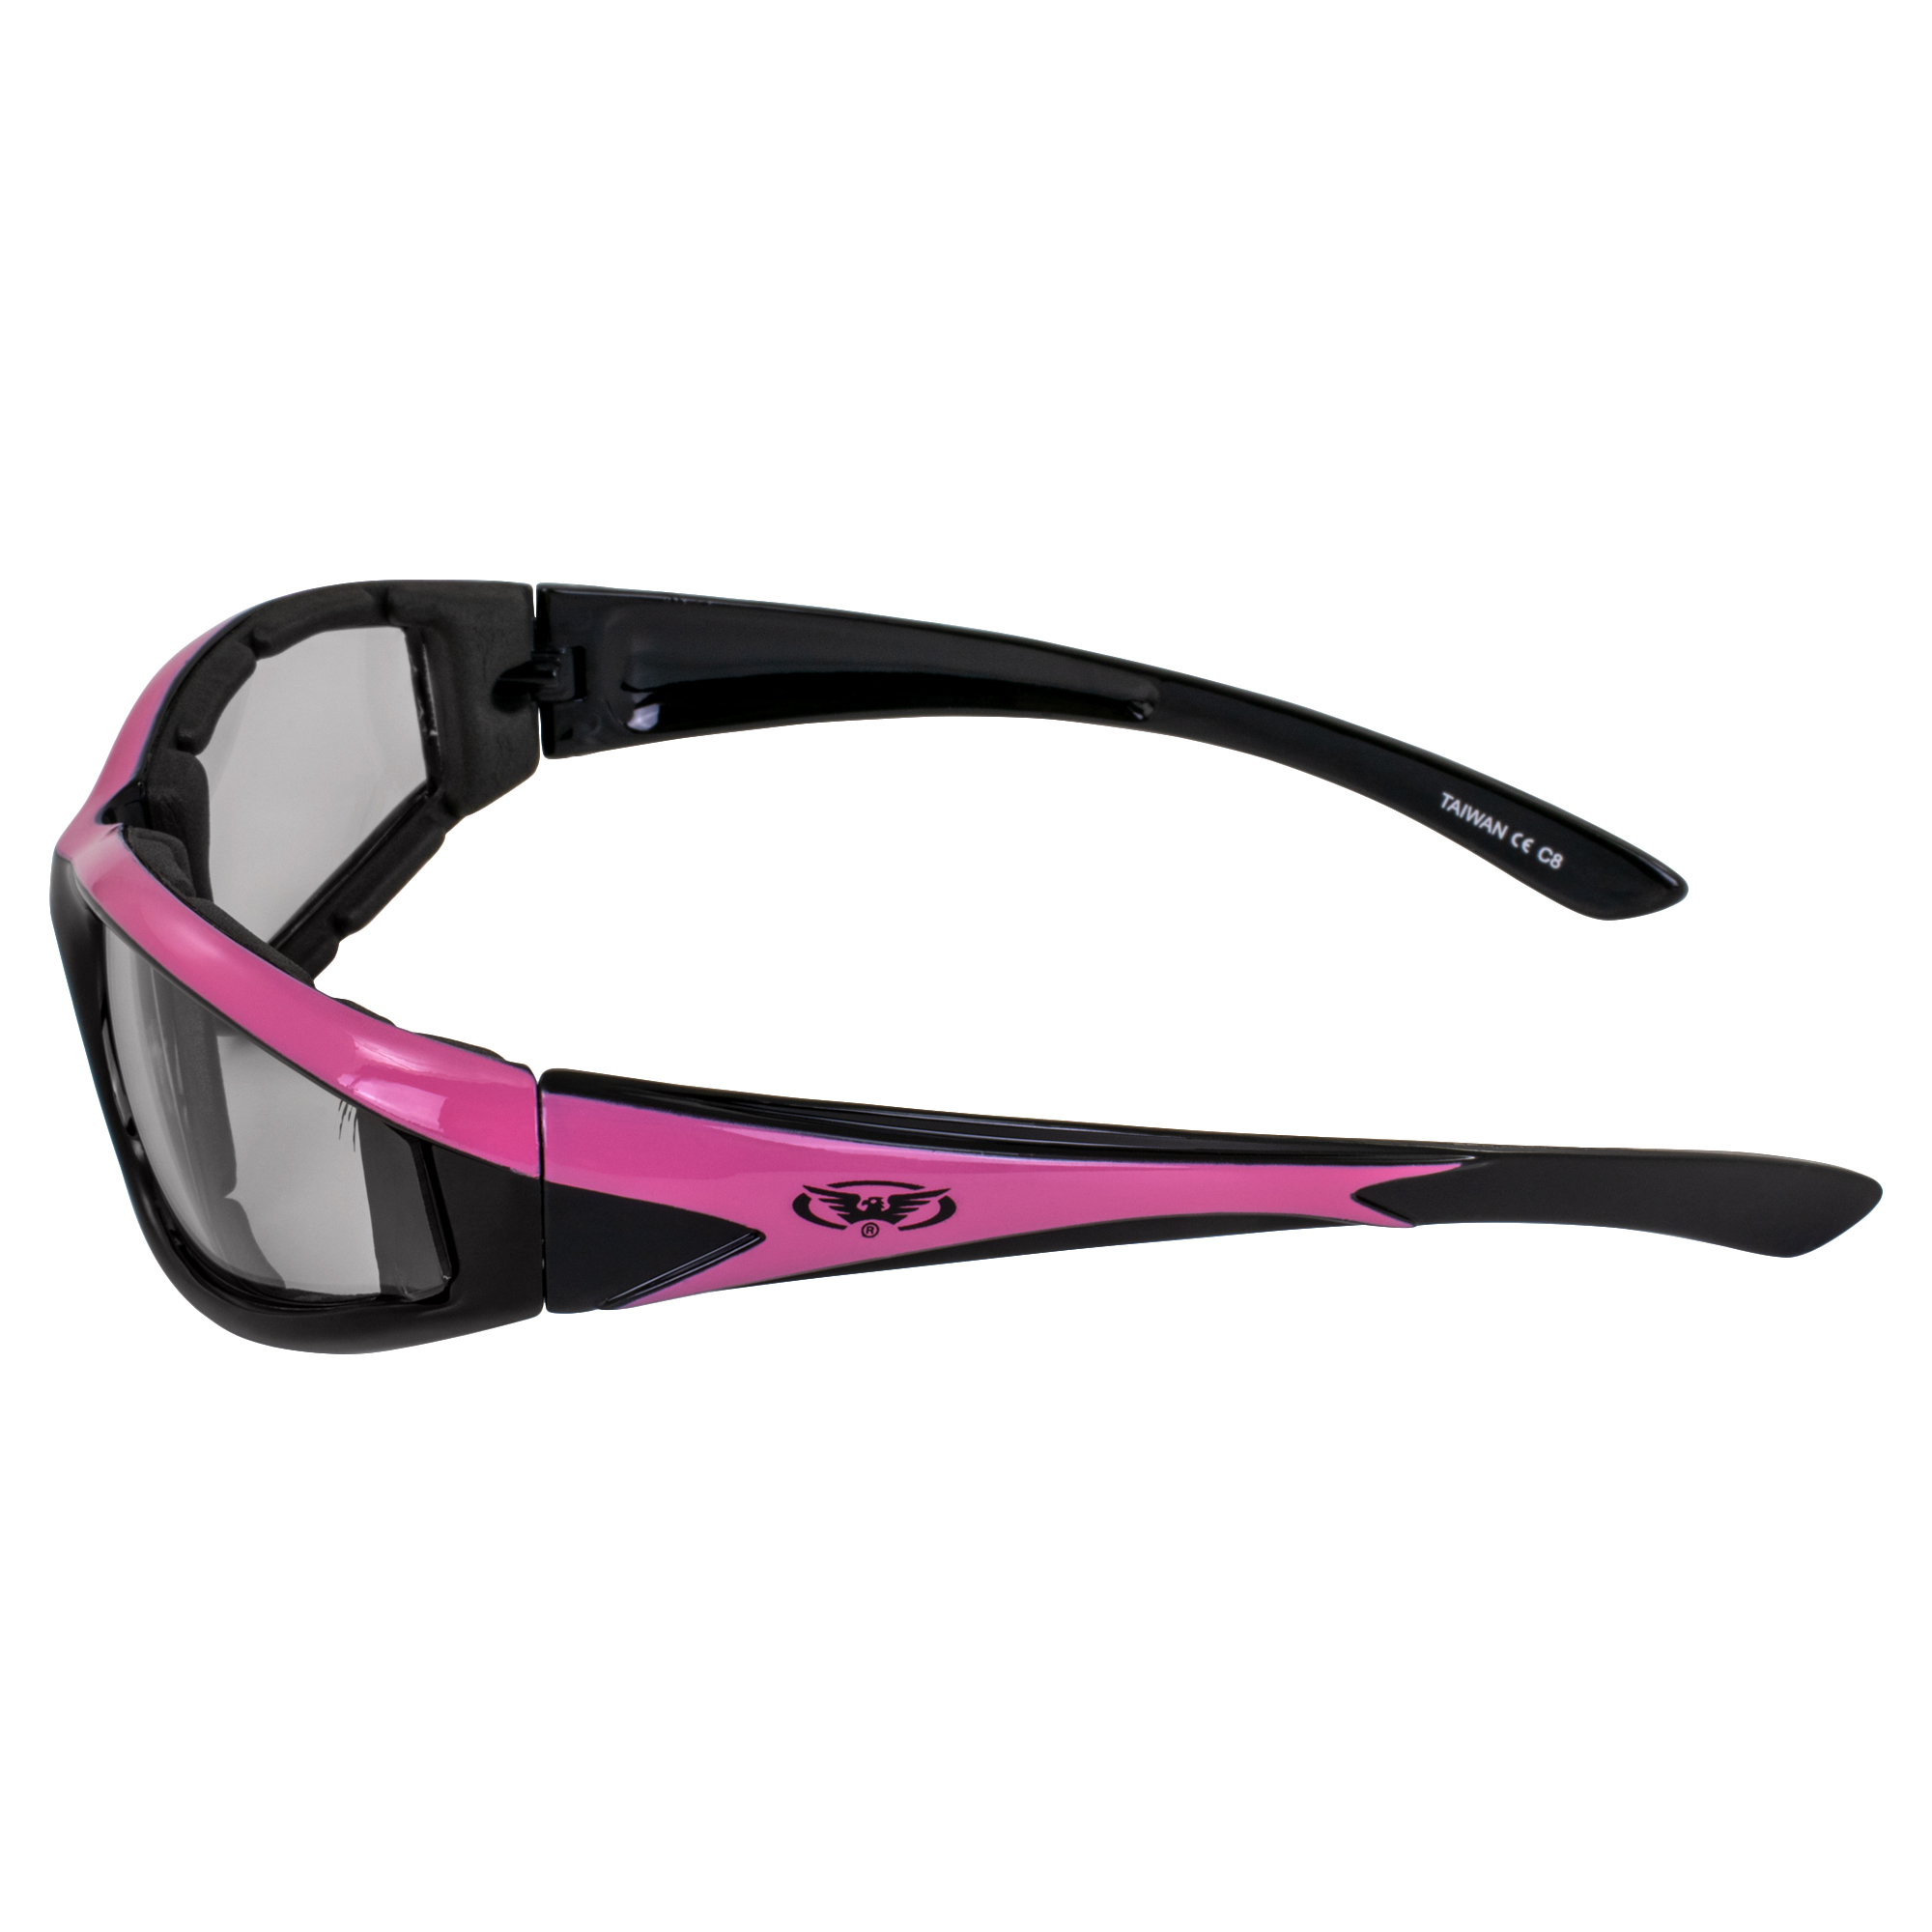 Global Vision Eyewear Hawkeye-24 Padded Motorcycle Riding Sunglasses with Dual Color Frames and Clear to Smoke Photochromic Lenses - image 5 of 8